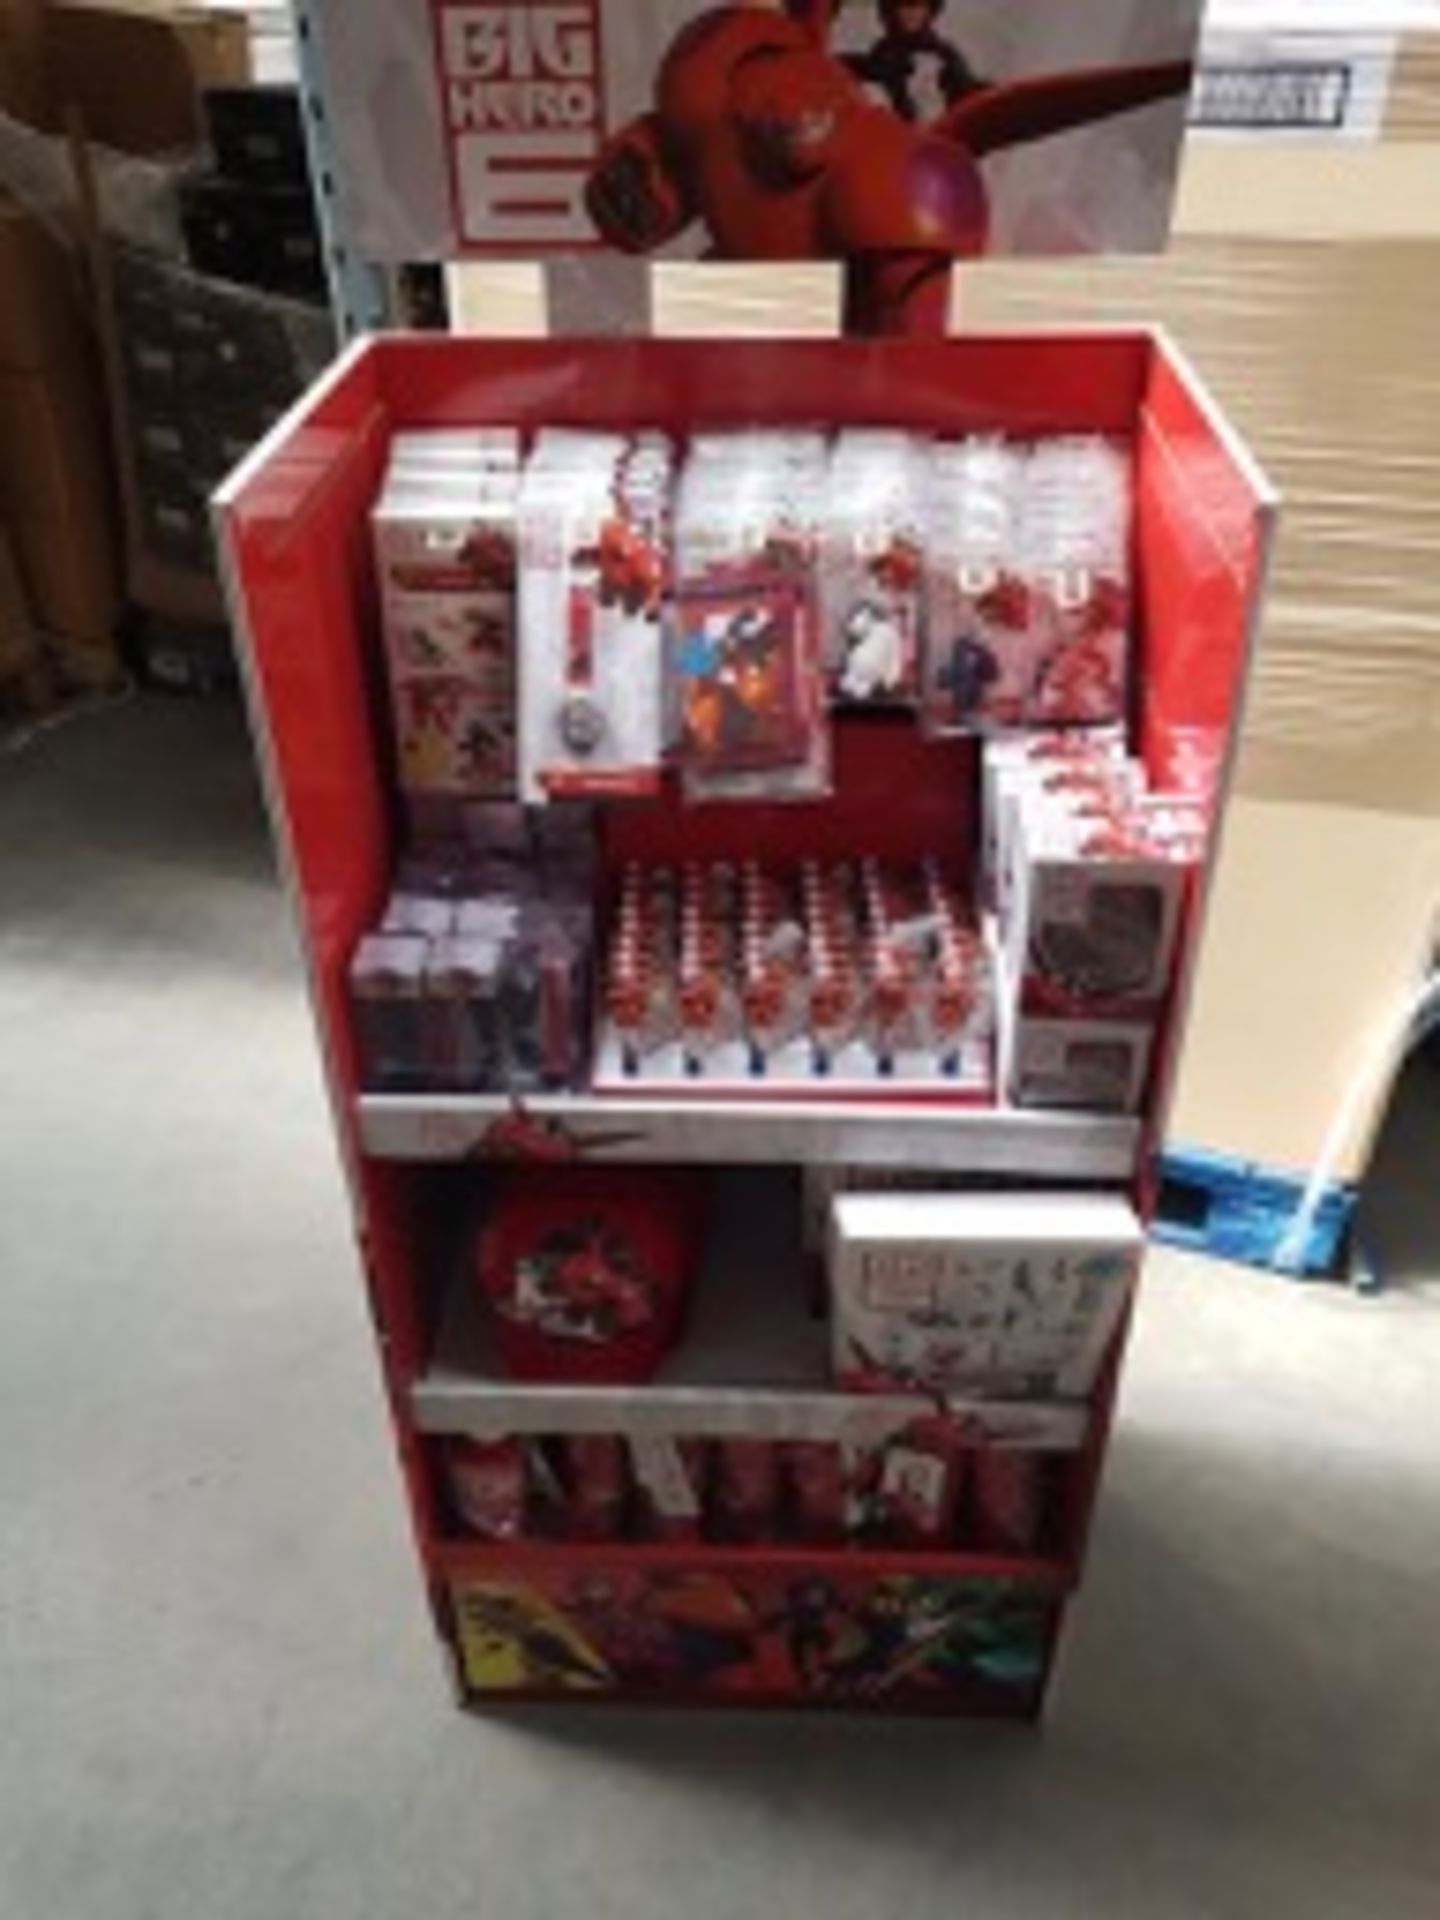 1 x Brand New Big Hero 6 - 328 piece Full Shop Display Unit. Contains: 36 Sticker Sets, 16